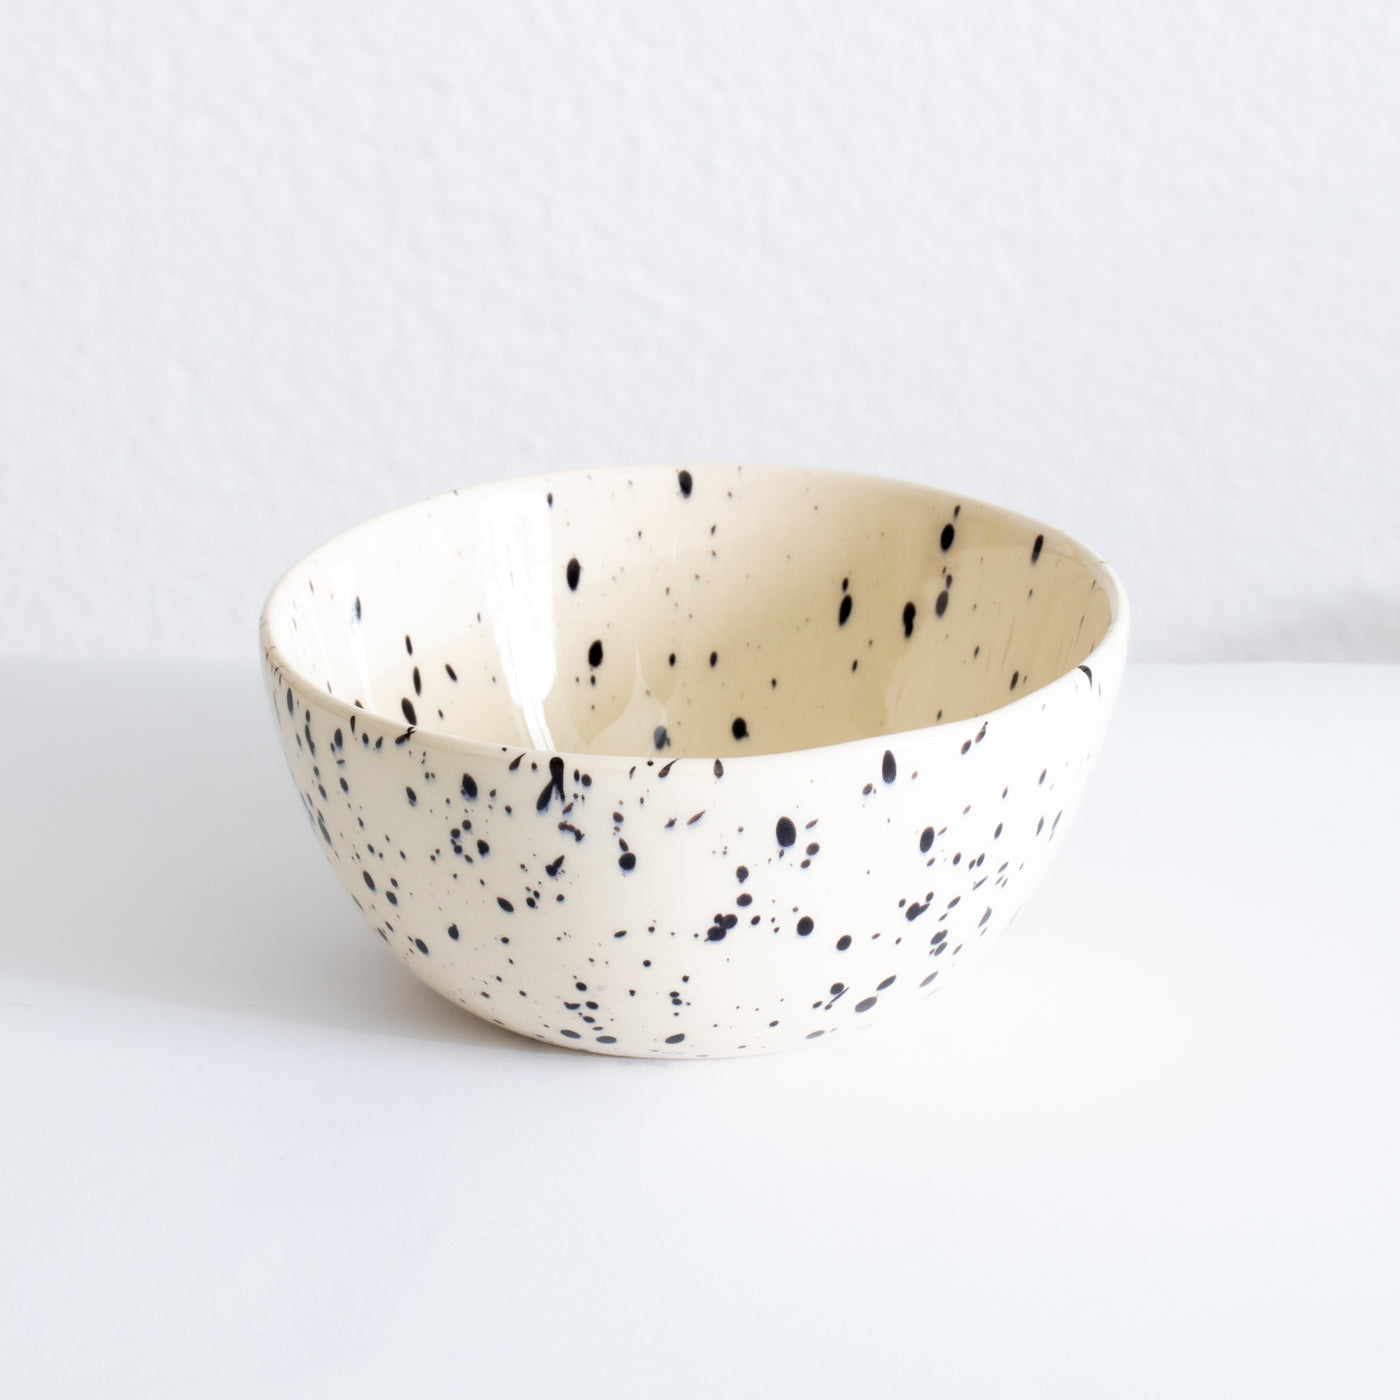 Main dish bowl for poke or curries in beige with black color speckled handmade